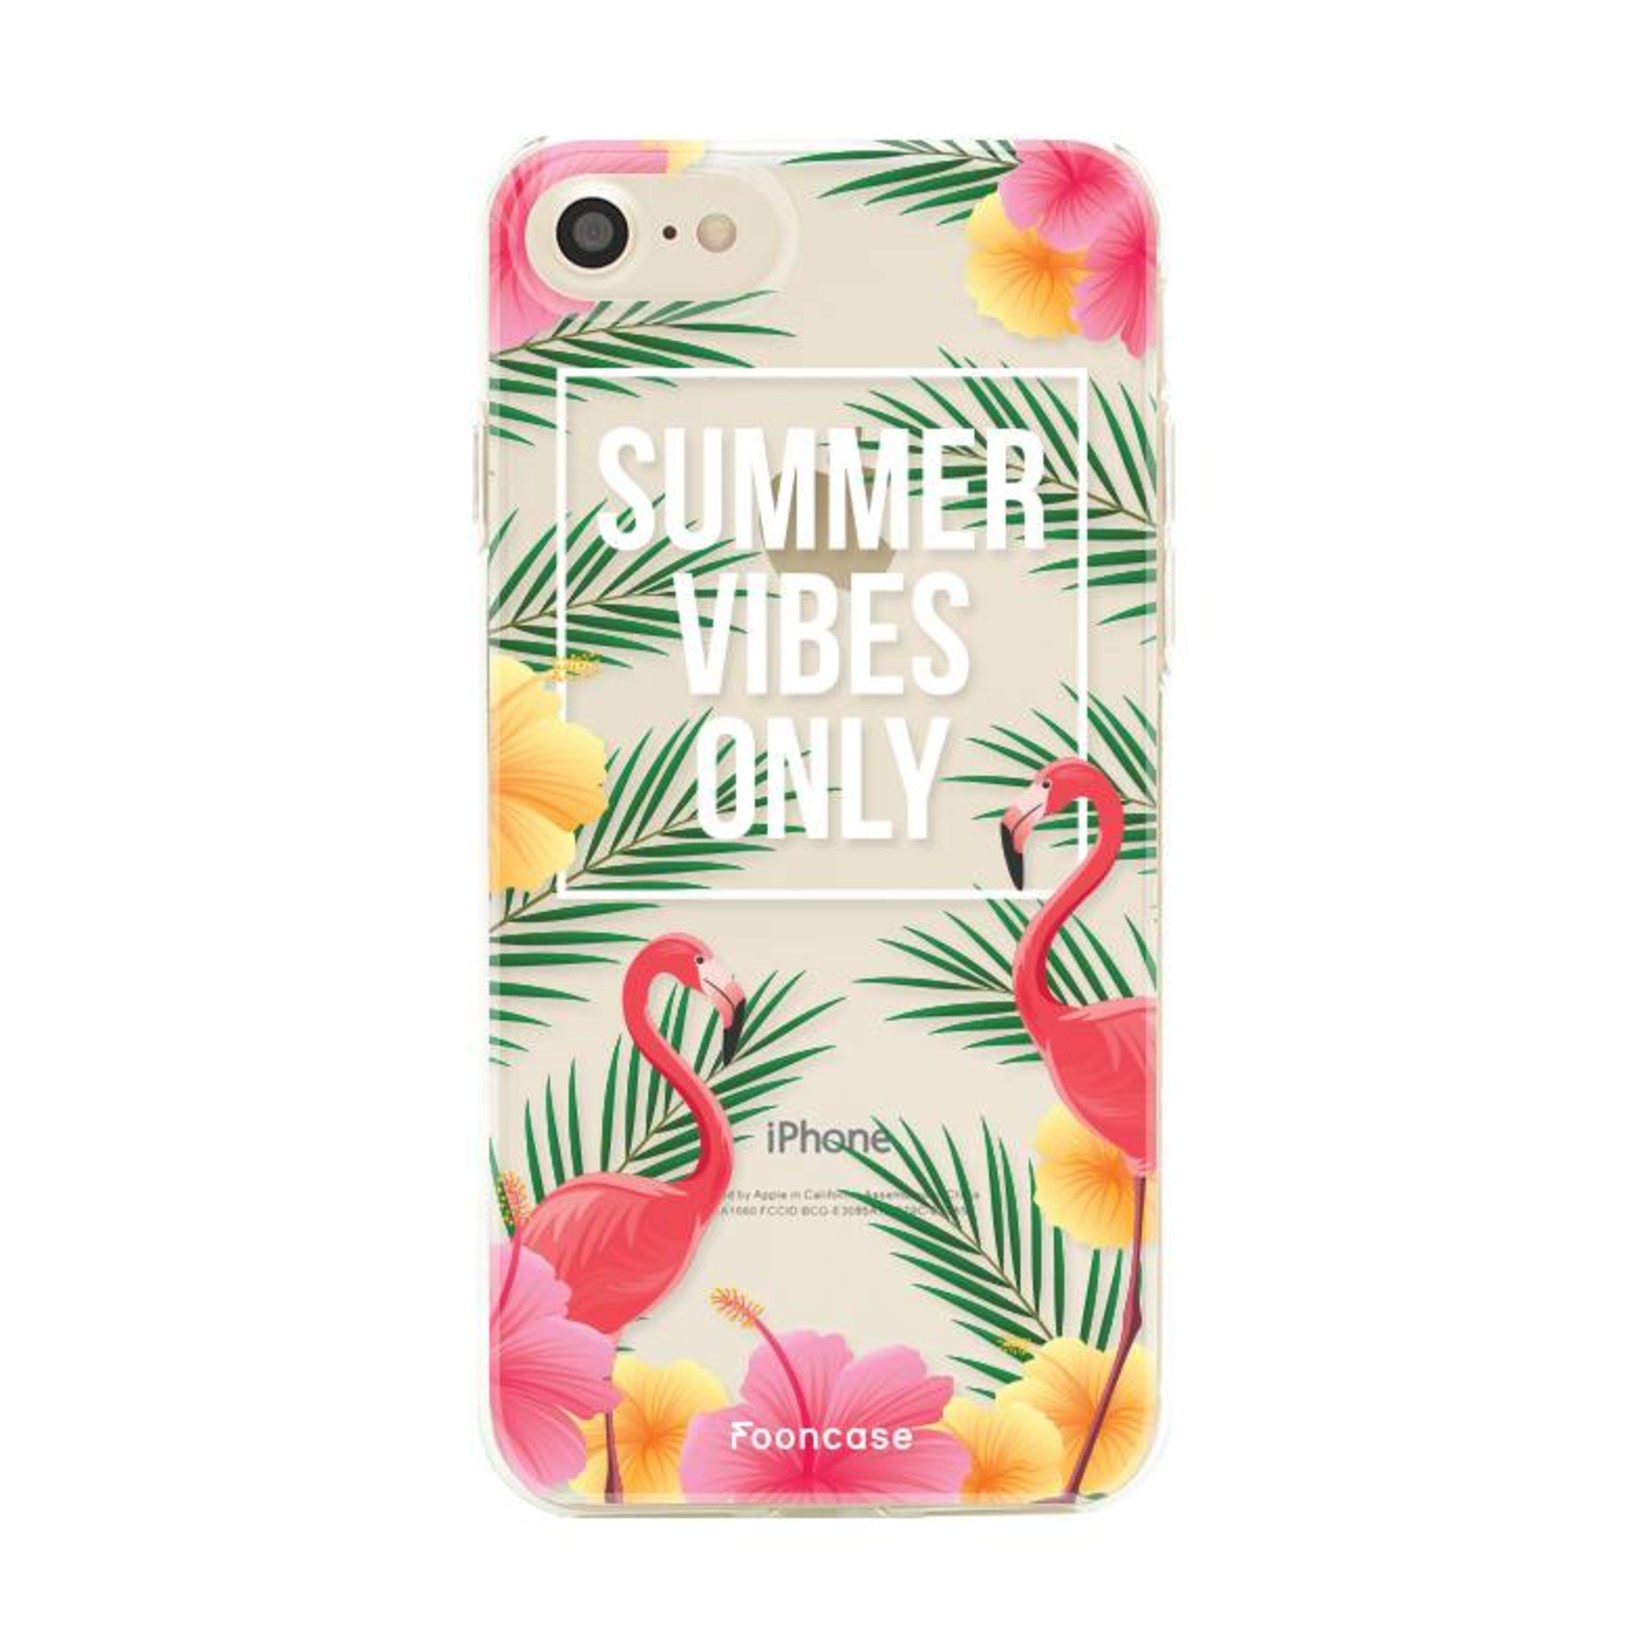 FOONCASE iPhone SE (2020) Case - Summer Vibes Only